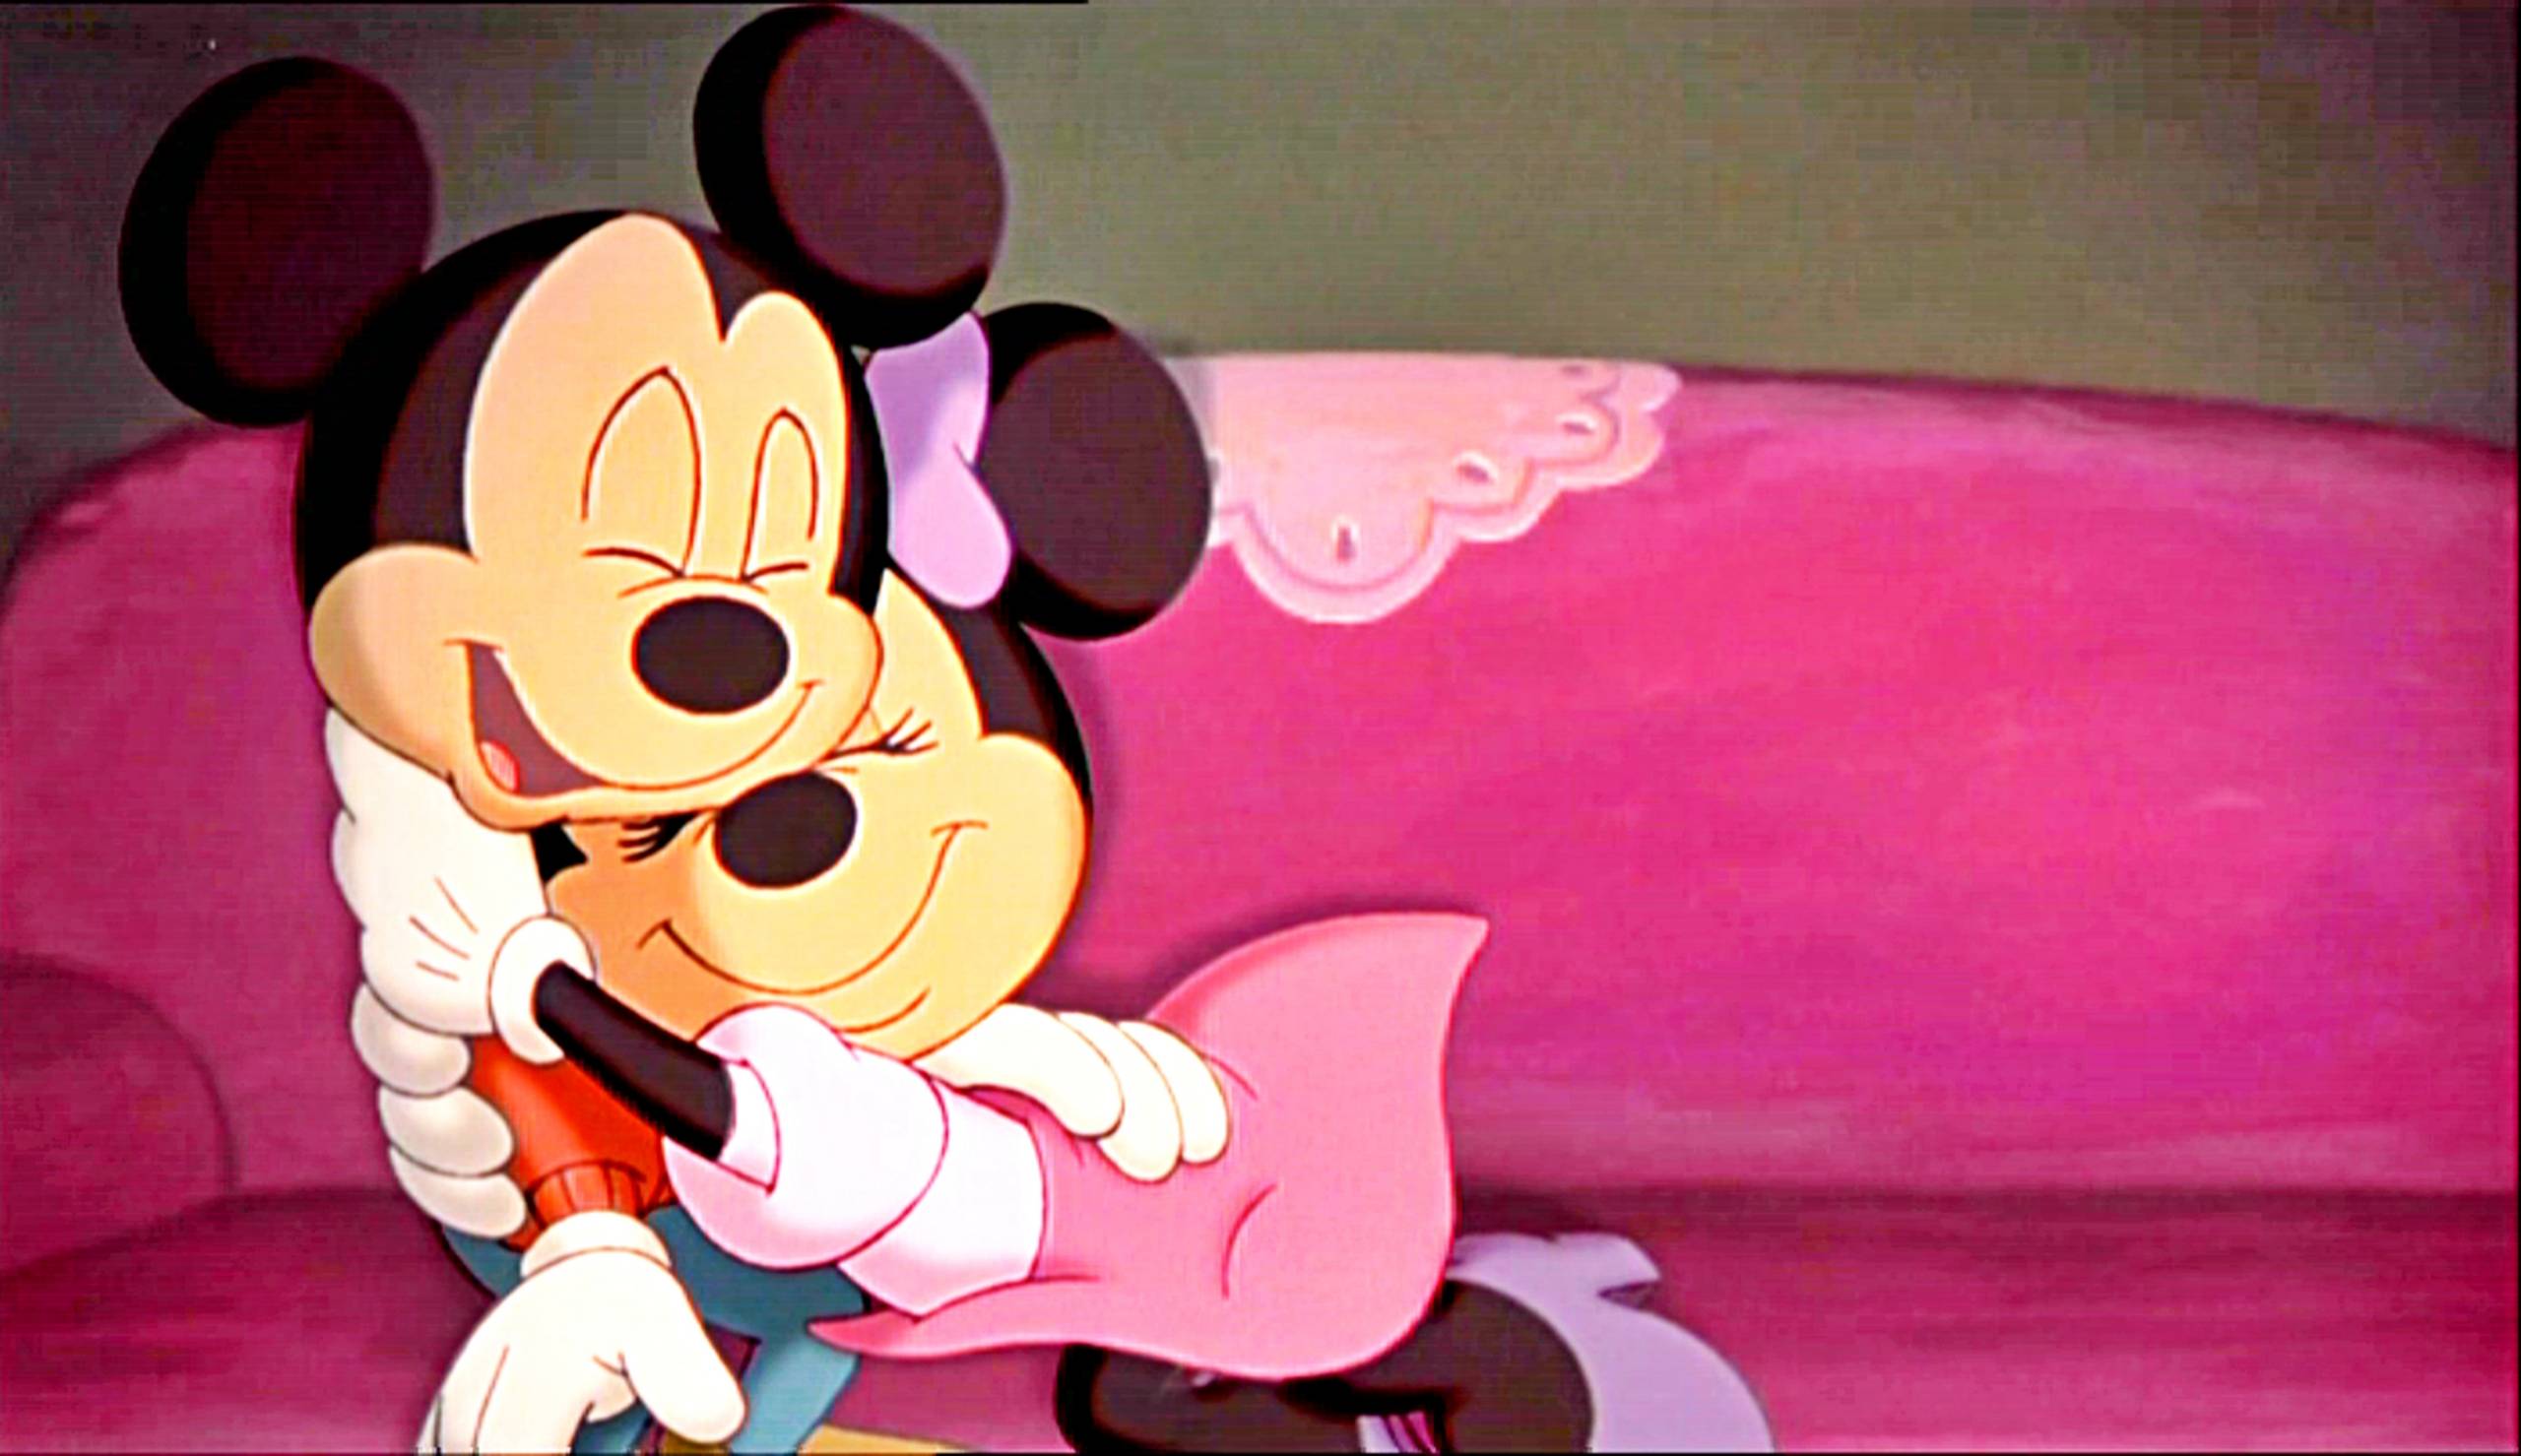 Download Wallpaper Lucu Minnie Mouse - Minnie And Mickey Mouse Hugging , HD Wallpaper & Backgrounds